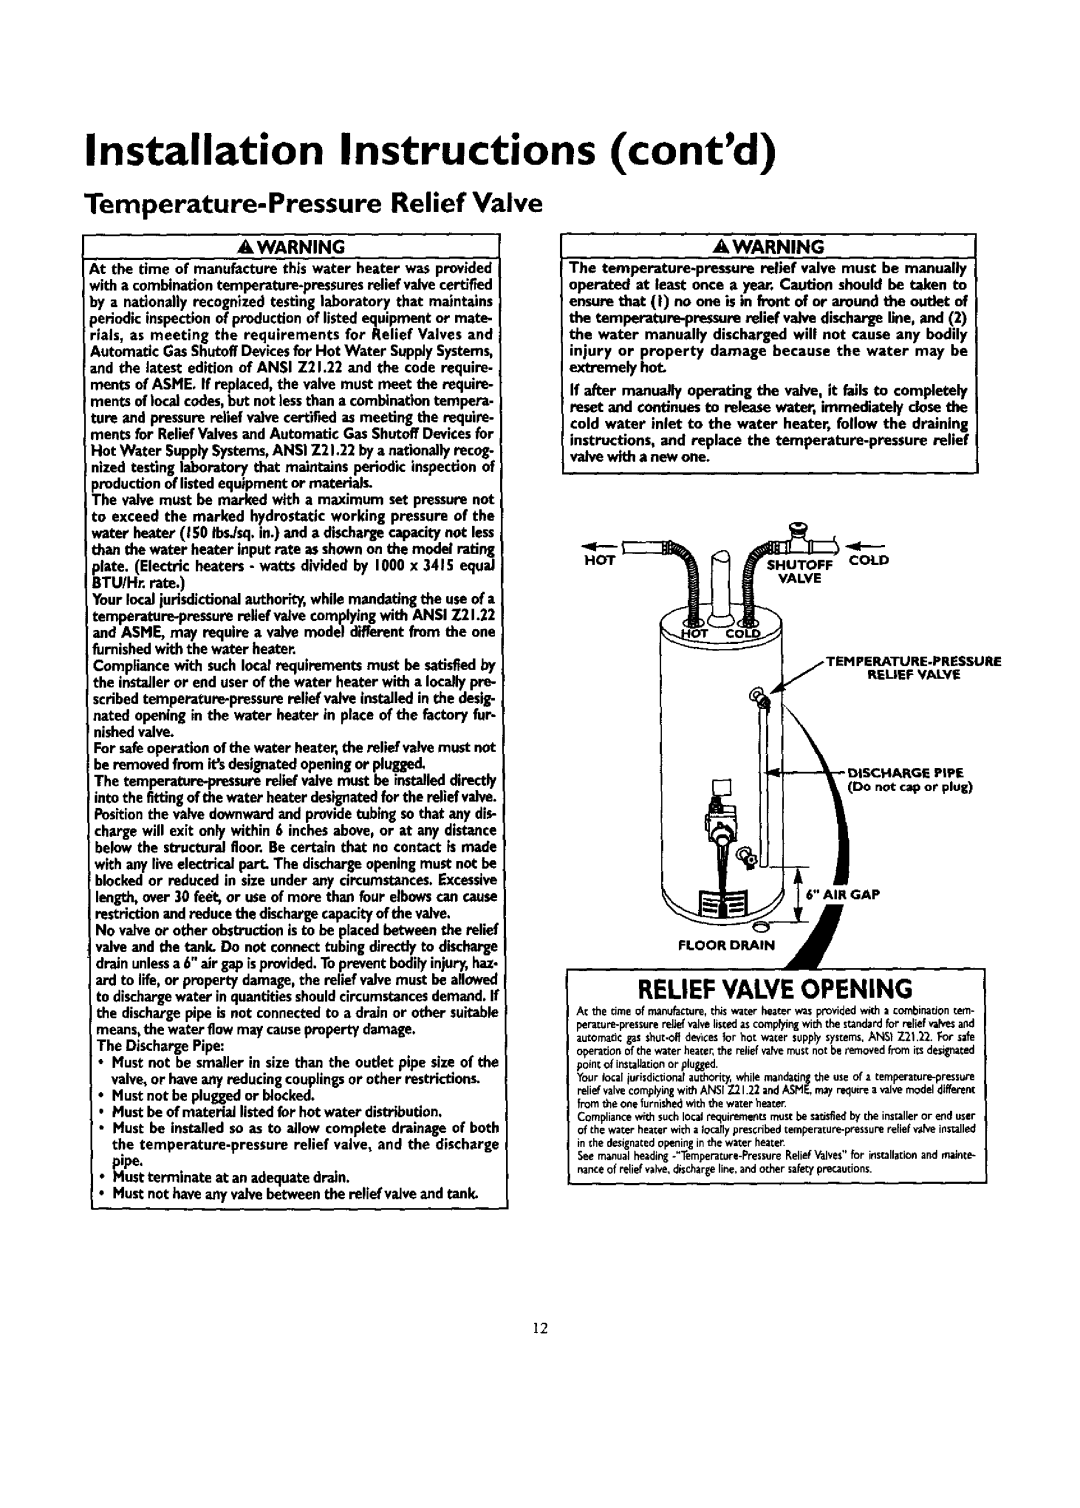 Kenmore 153.332418 Installation Instructions contd, Temperature.Pressure Relief Valve, Reliefvalve Opening, extremely hot 